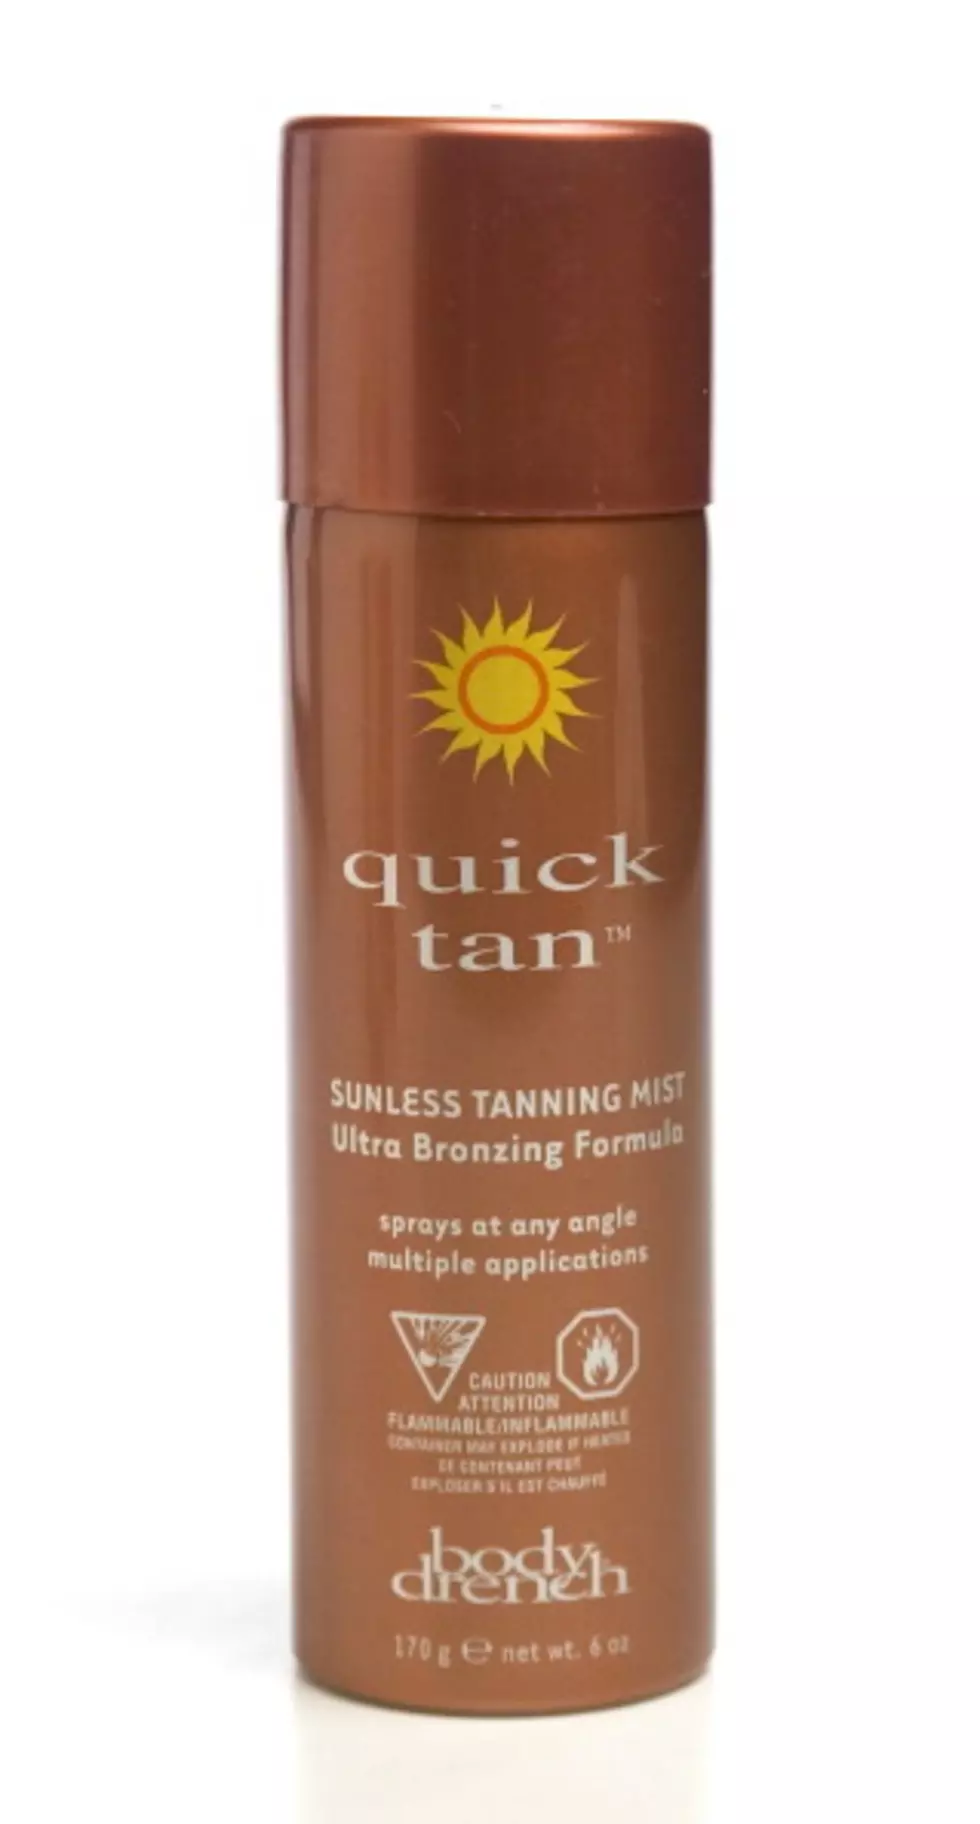 Tan in a Can!